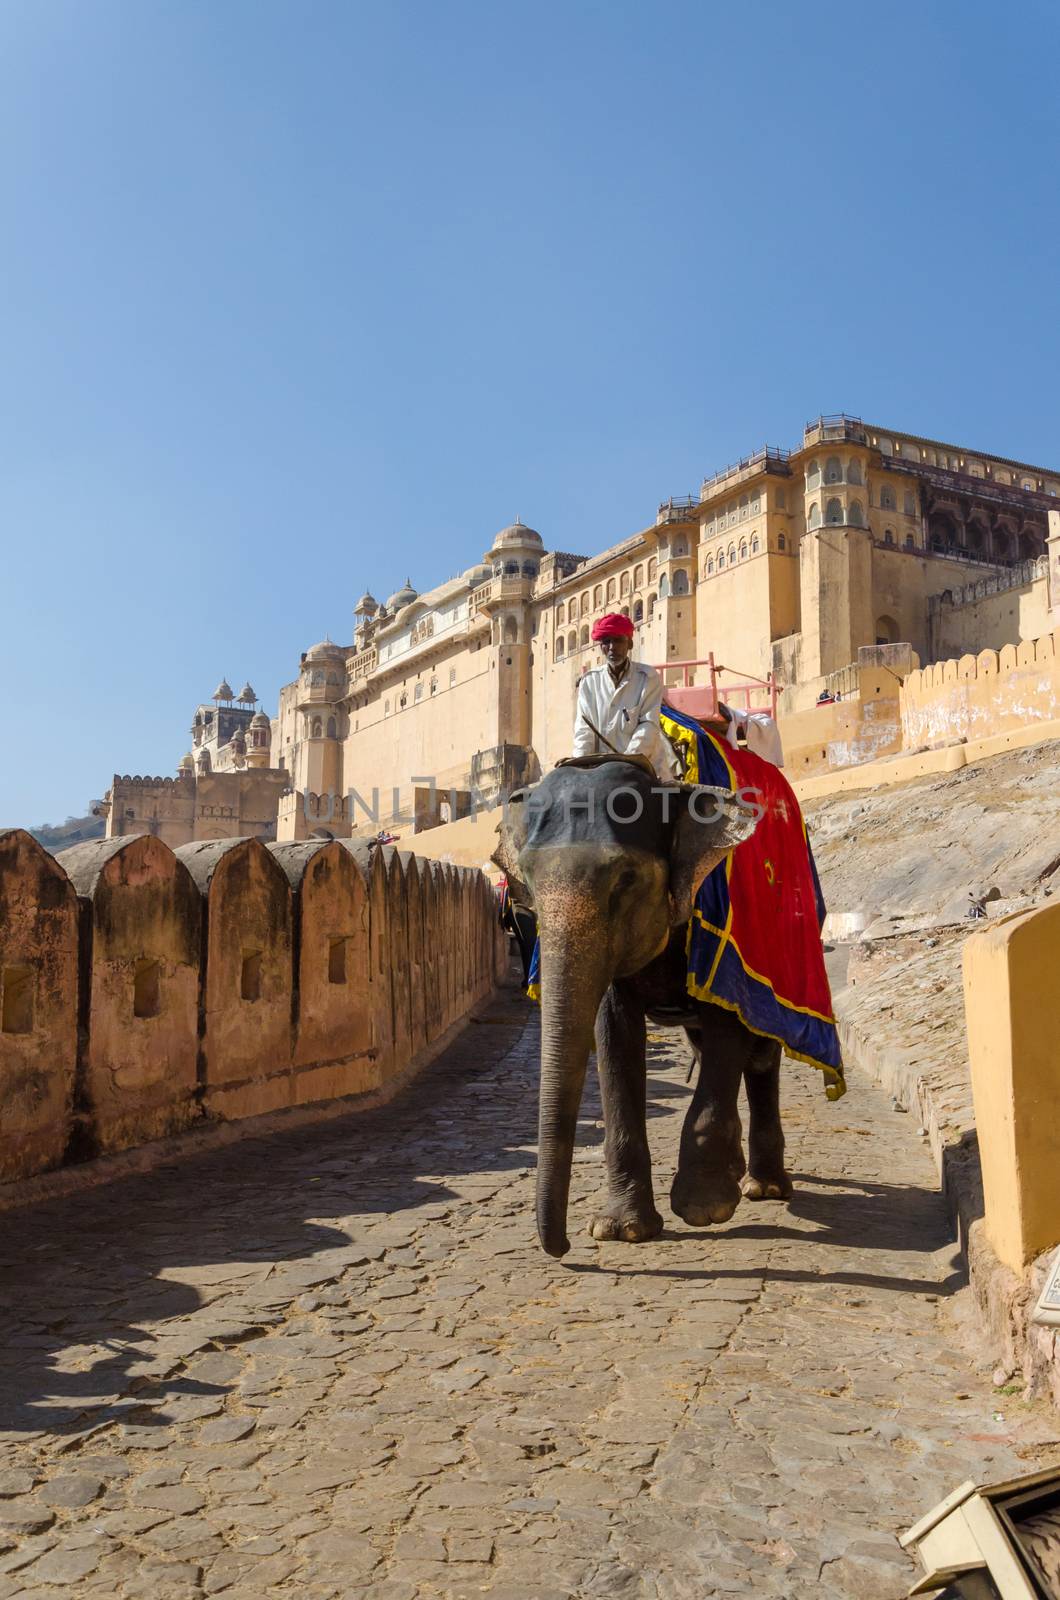 Jaipur, India - December 29, 2014: Decorated elephant at Amber Fort in Jaipur by siraanamwong